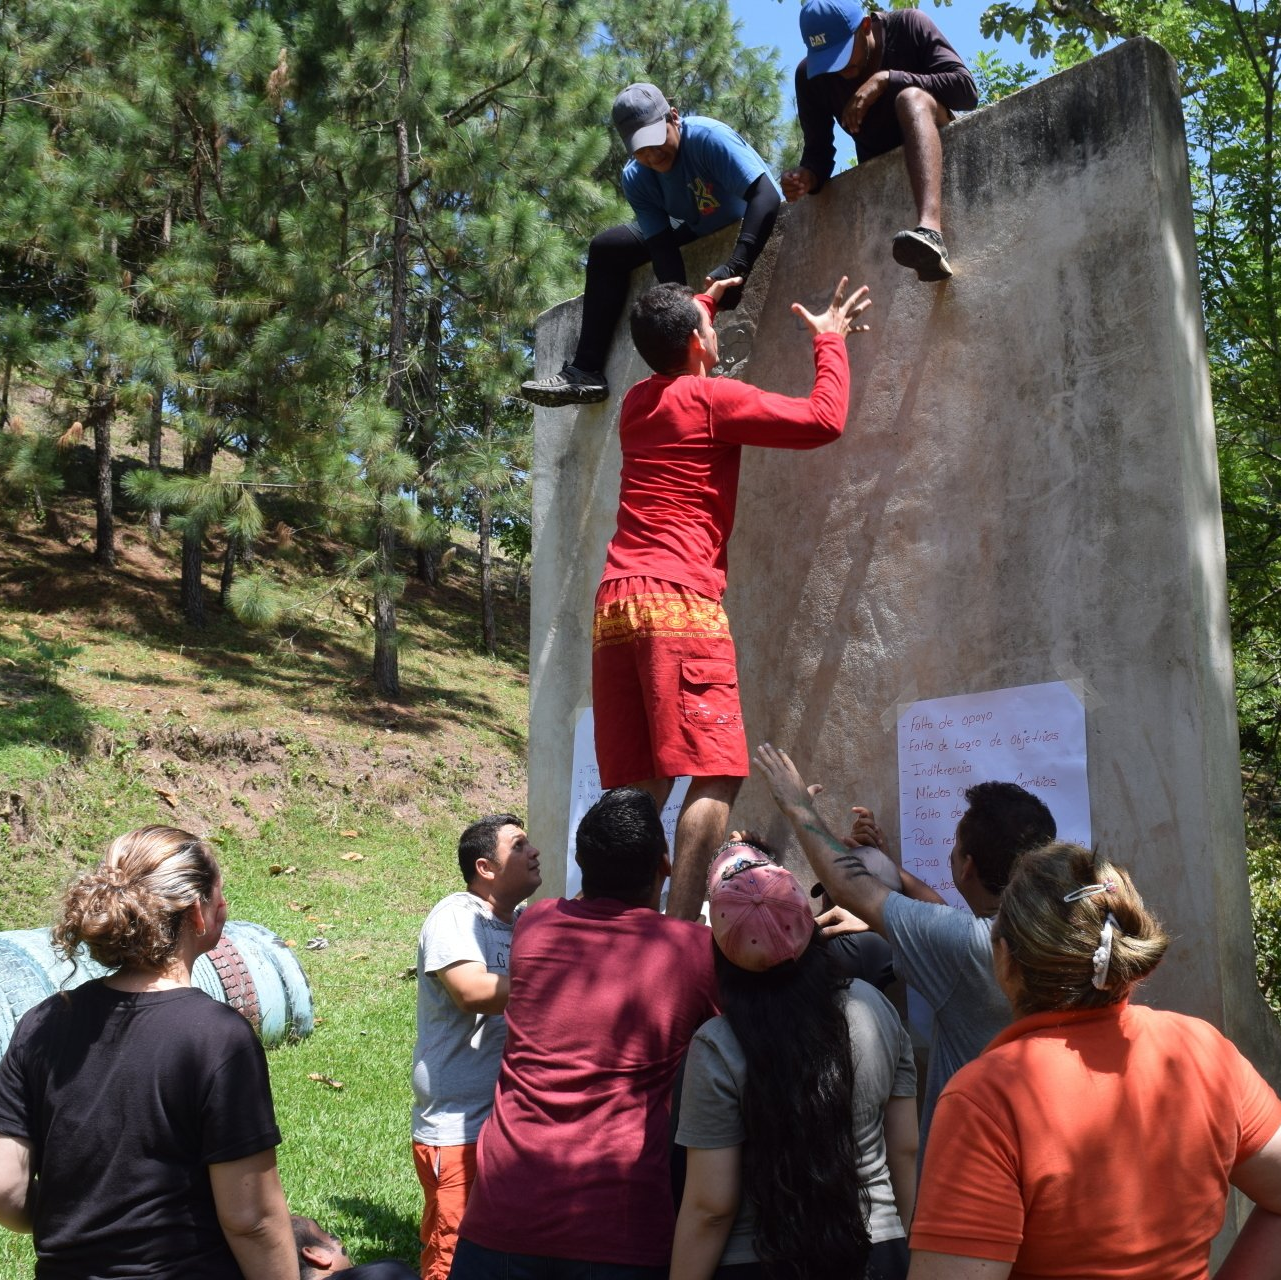 A team building exercise with people climbing over a wall while a group  catches them on the other side.